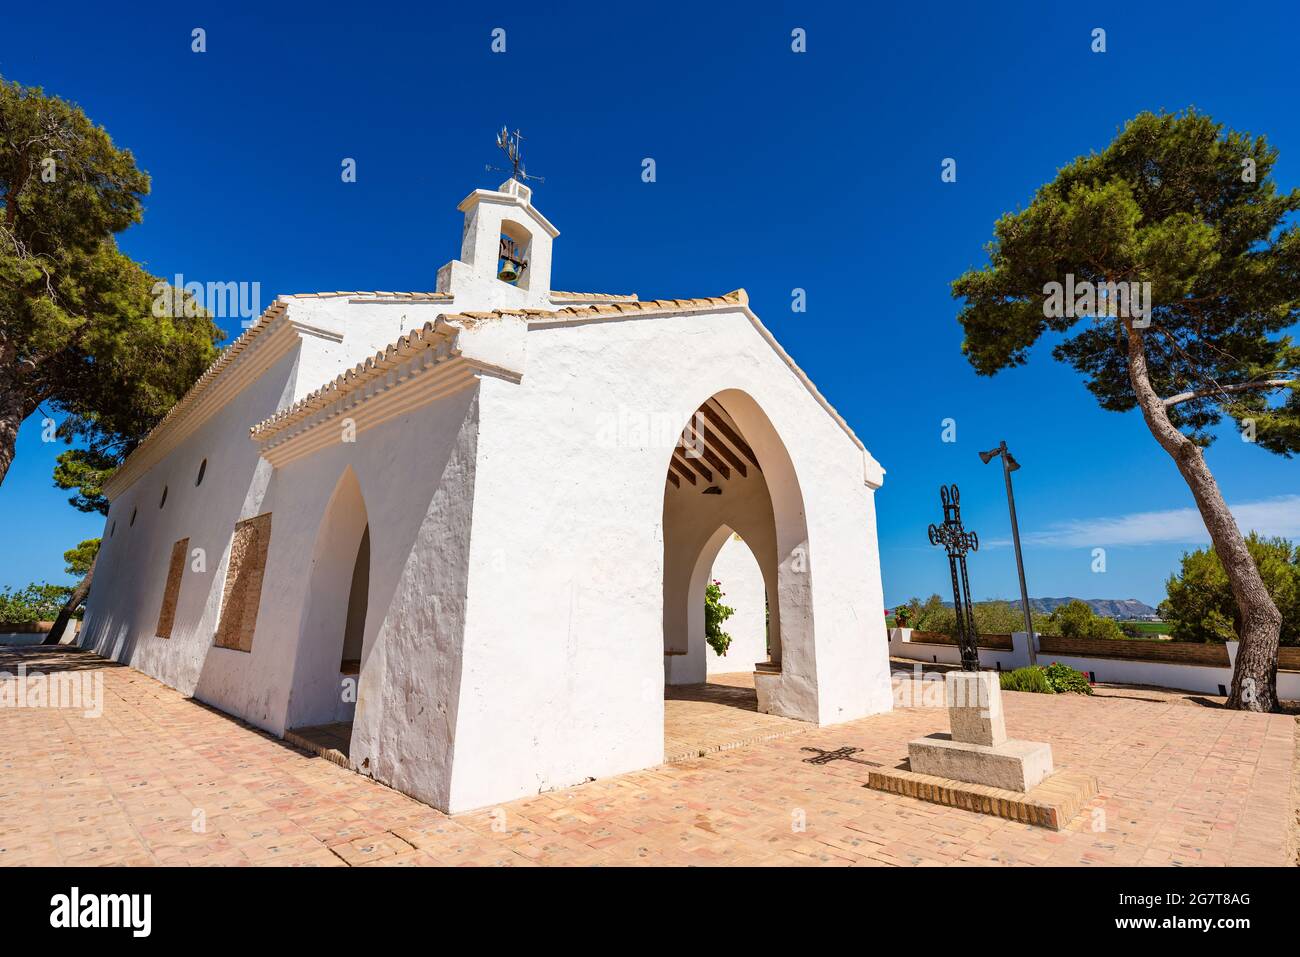 Sueca, Spain. Hermitage of the Saints. Muntanyeta dels Sants. White little building on top of a hill. Place of worship. Stock Photo